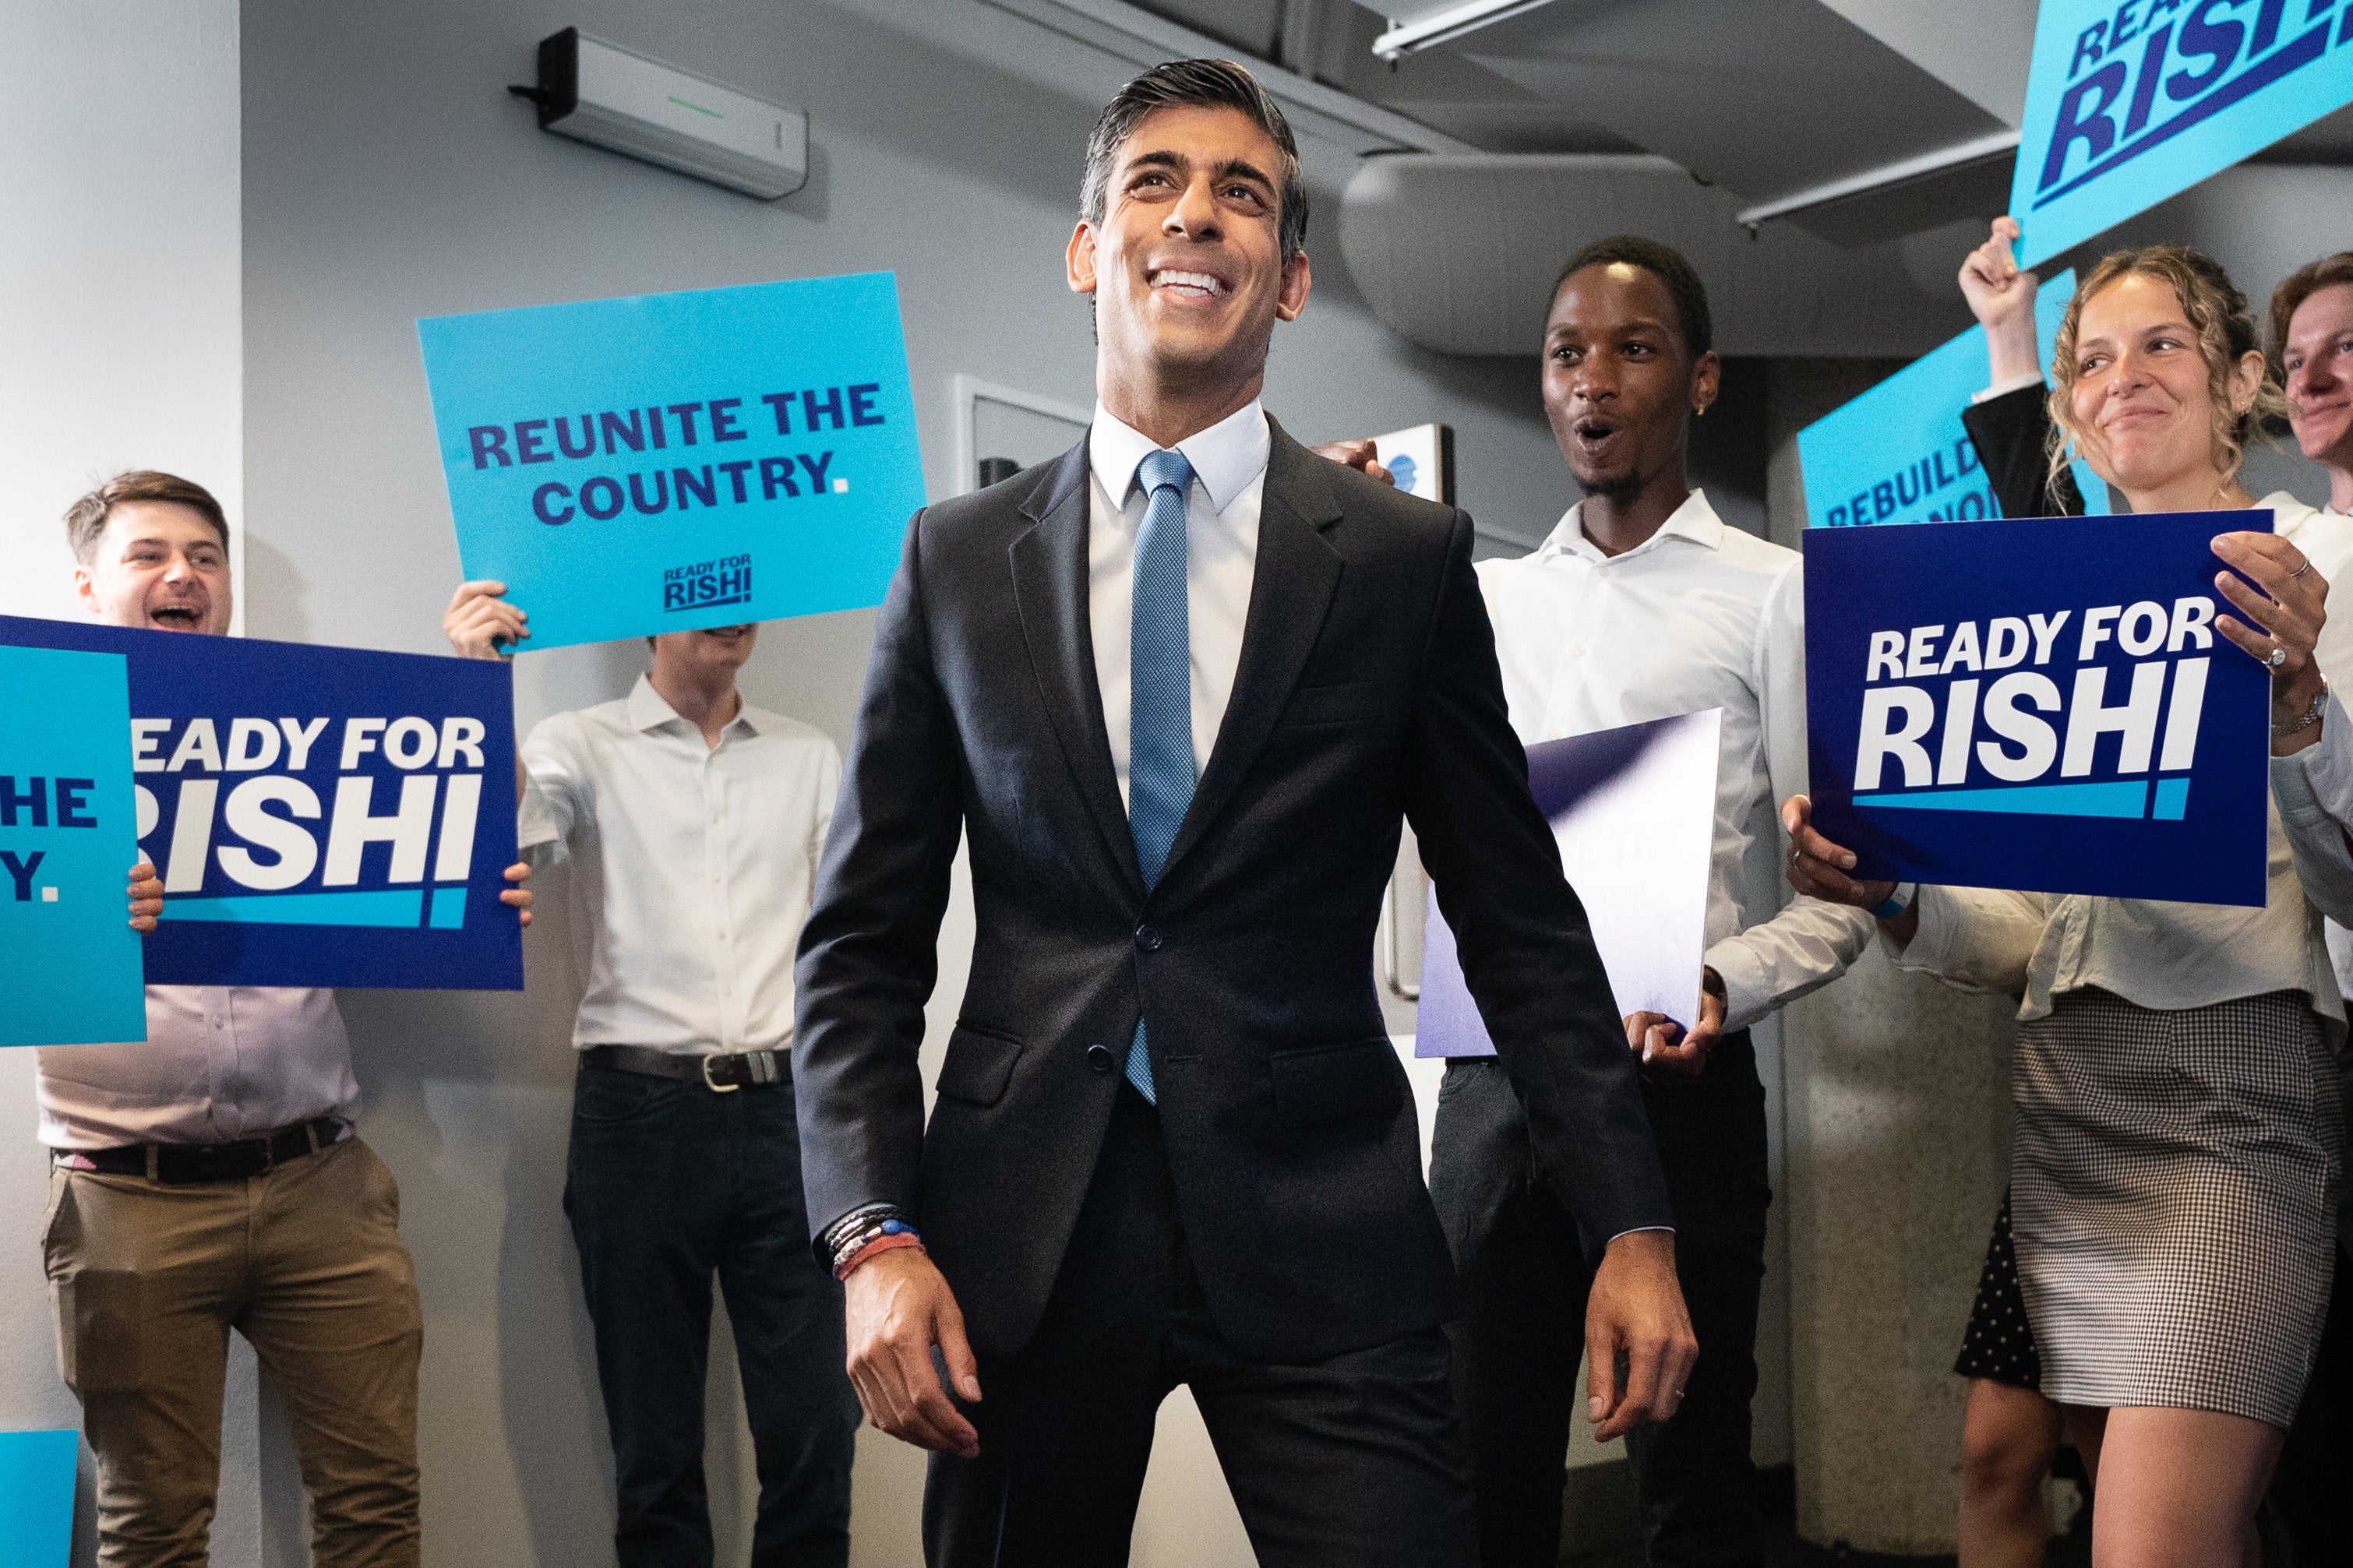 Millionaire Rishi Sunak is one of the final two in the leadership race